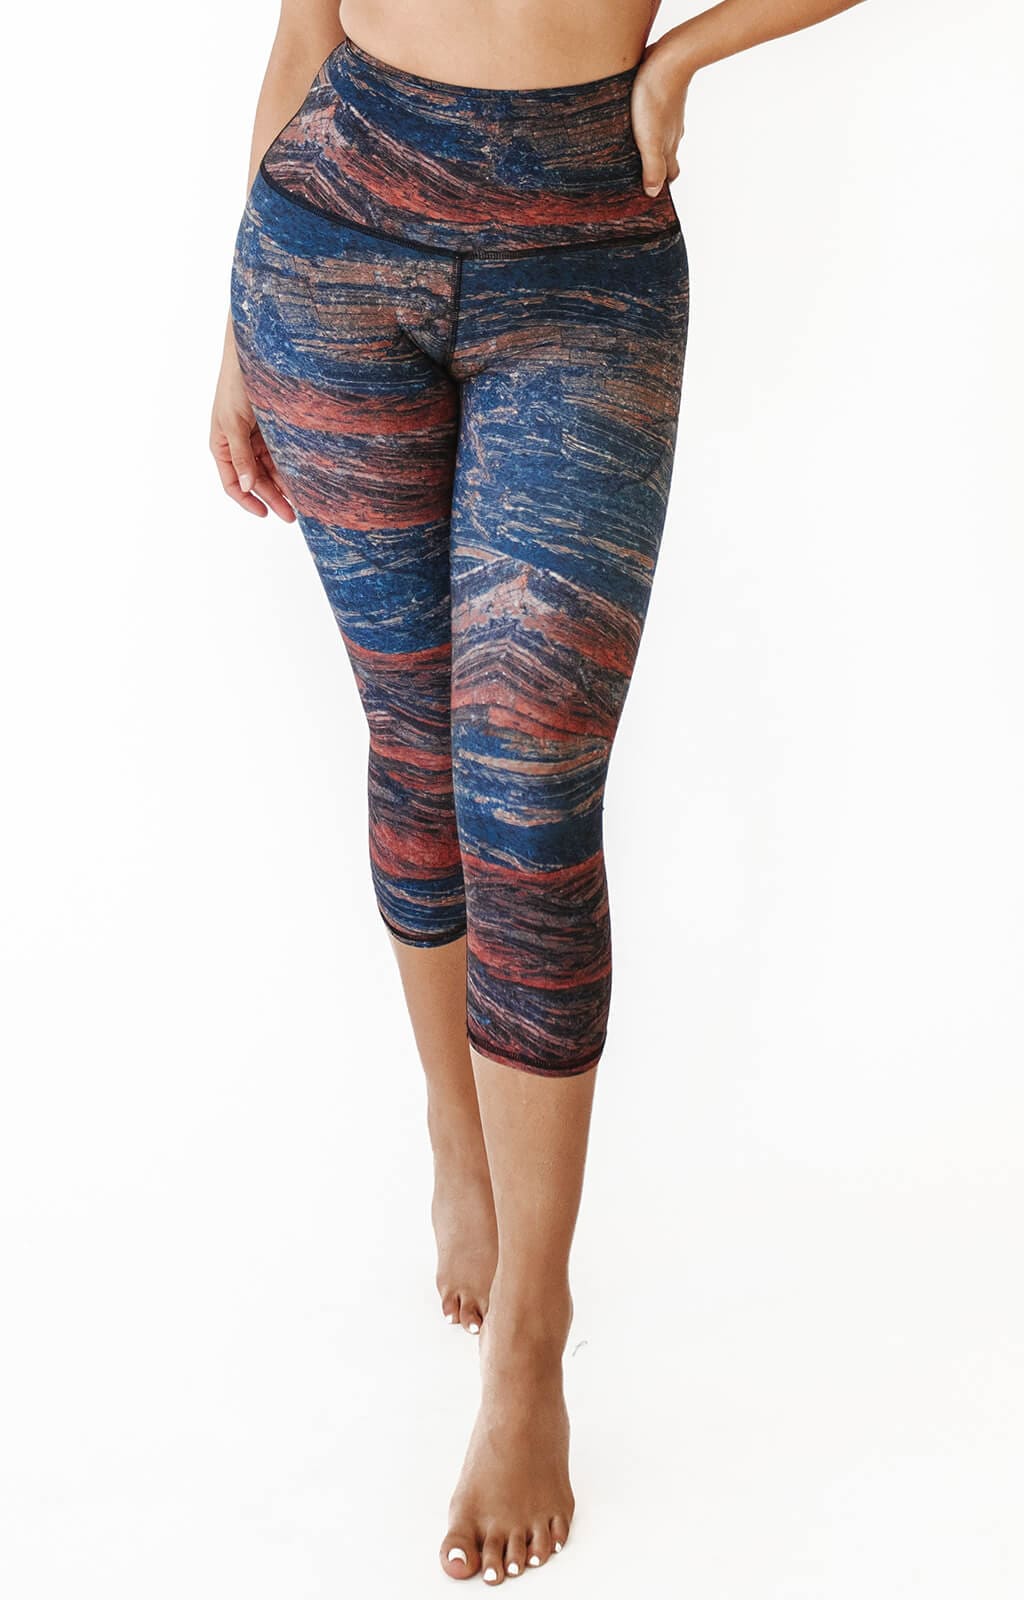 Pedra Printed Yoga Crops by Yoga Democracy - East Hills Casuals